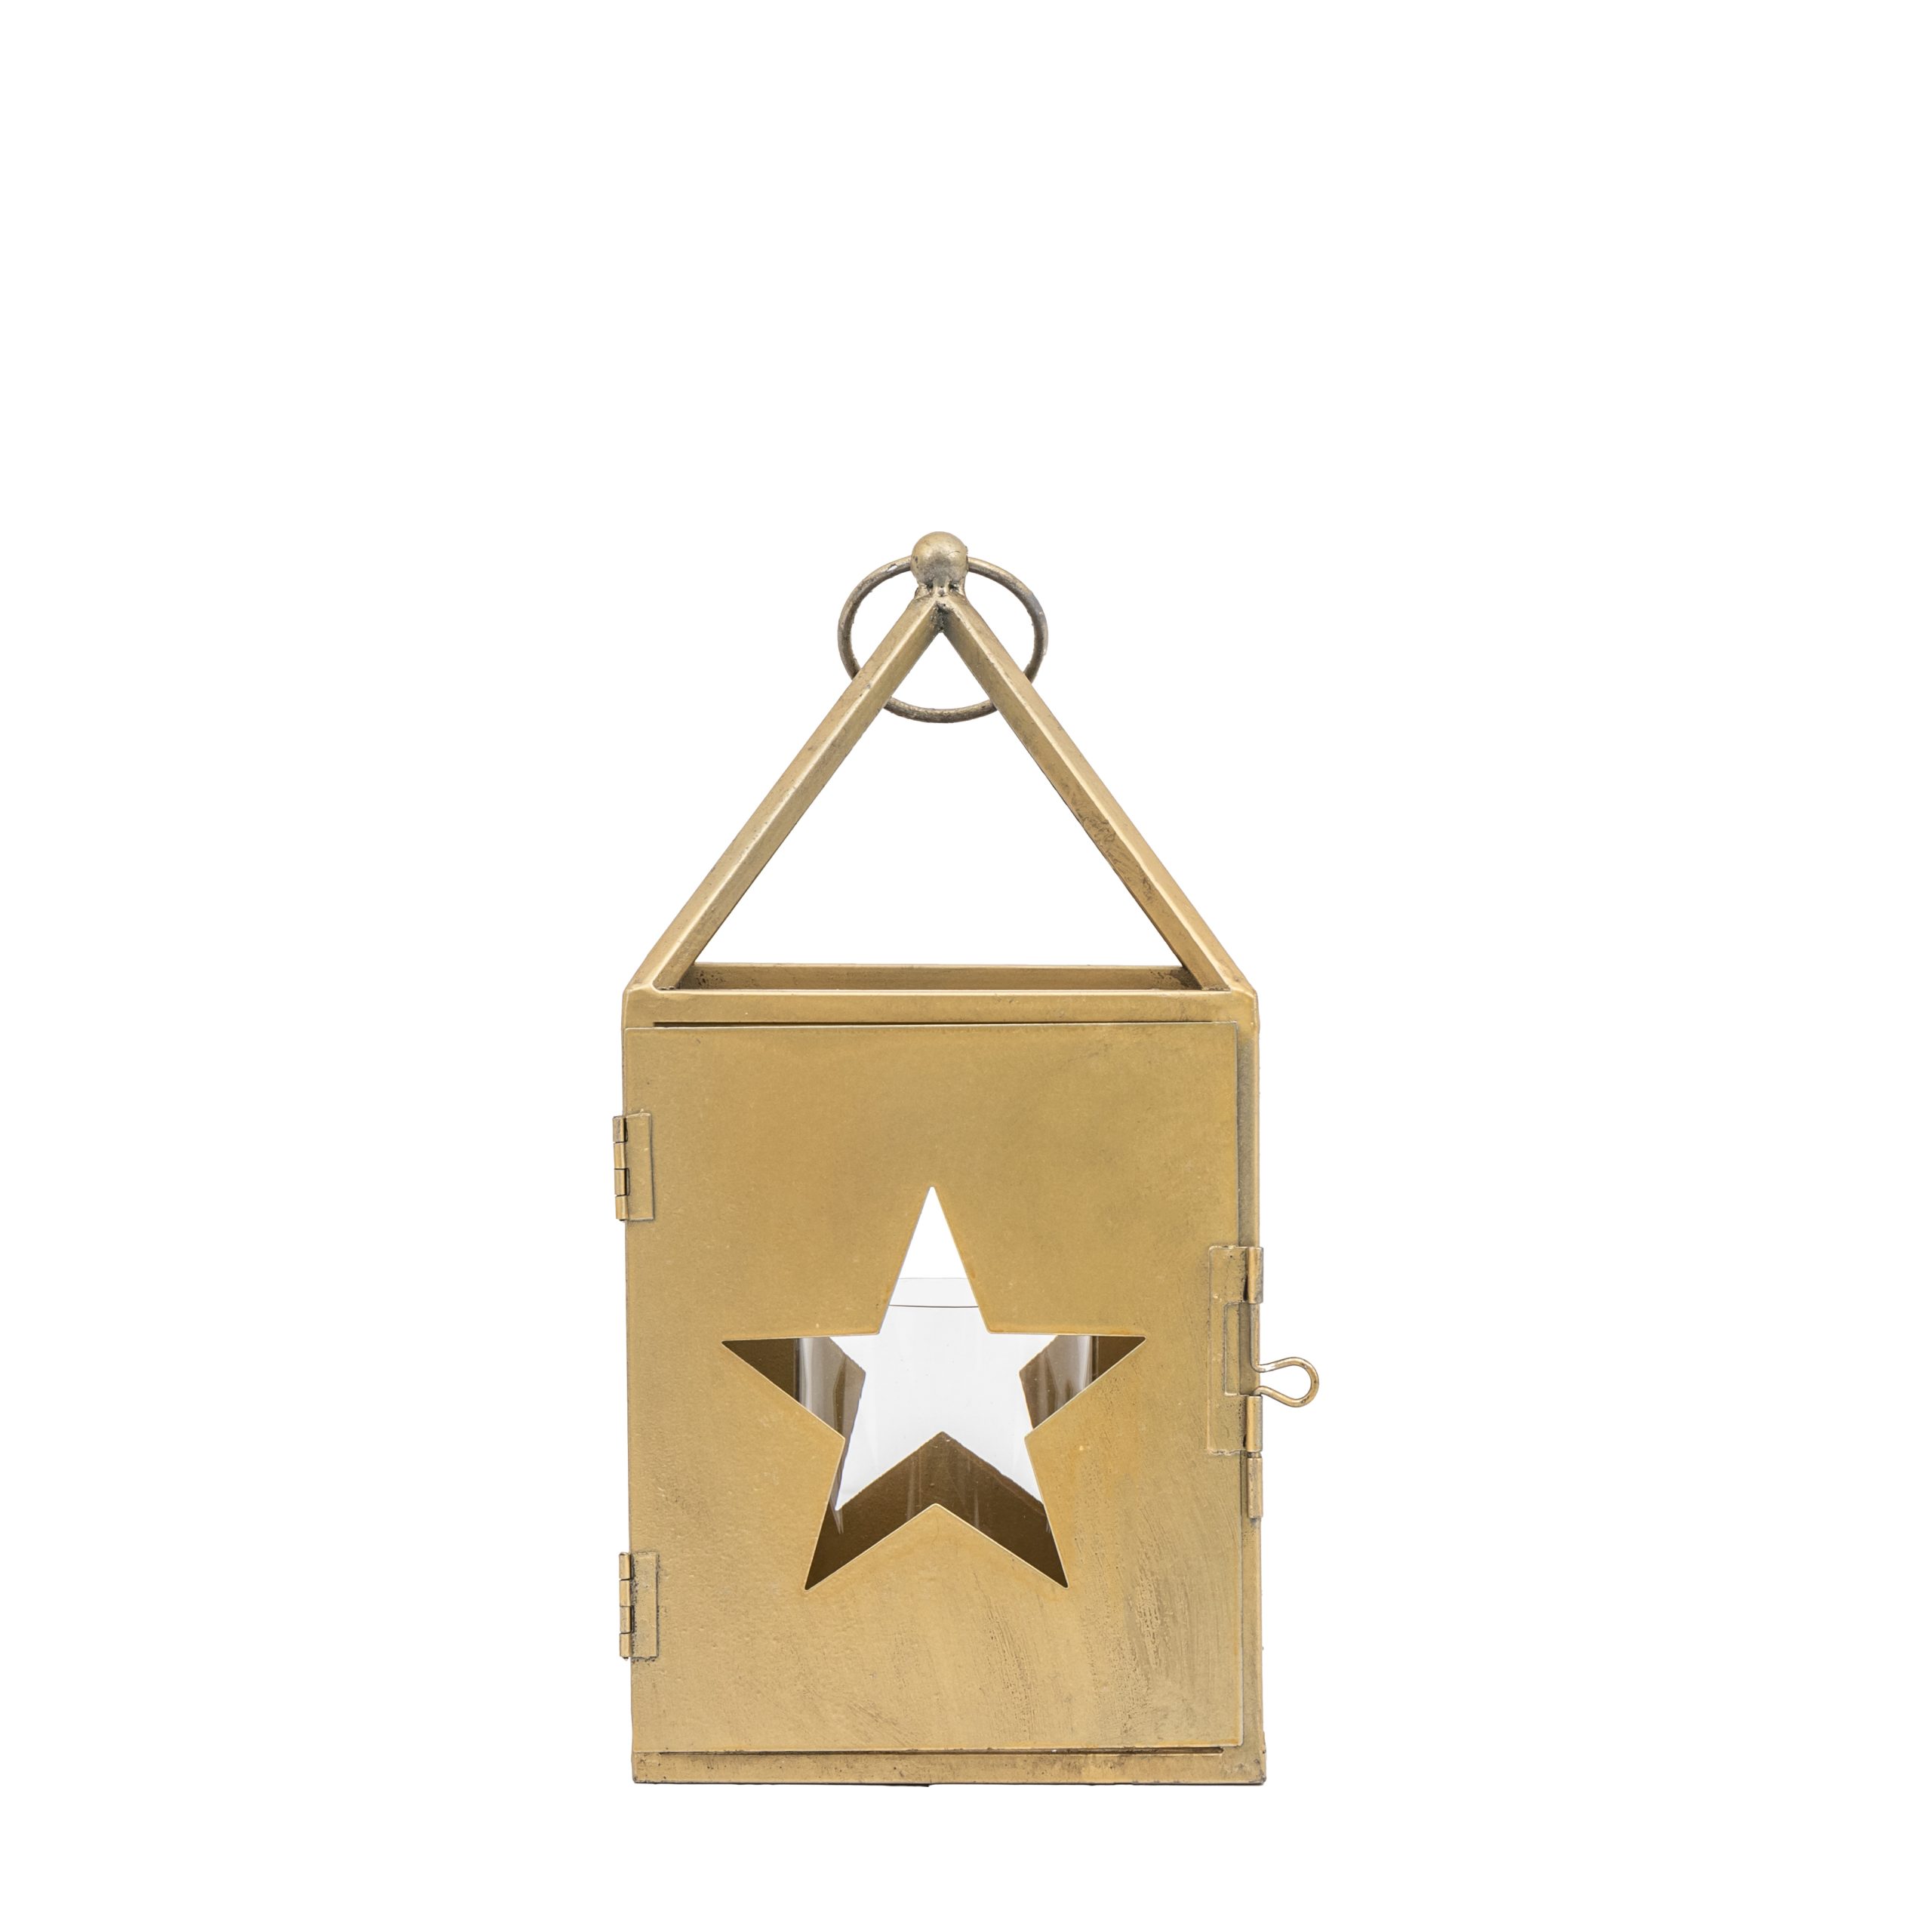 Gallery Direct Starry Lantern Small Antique Gold